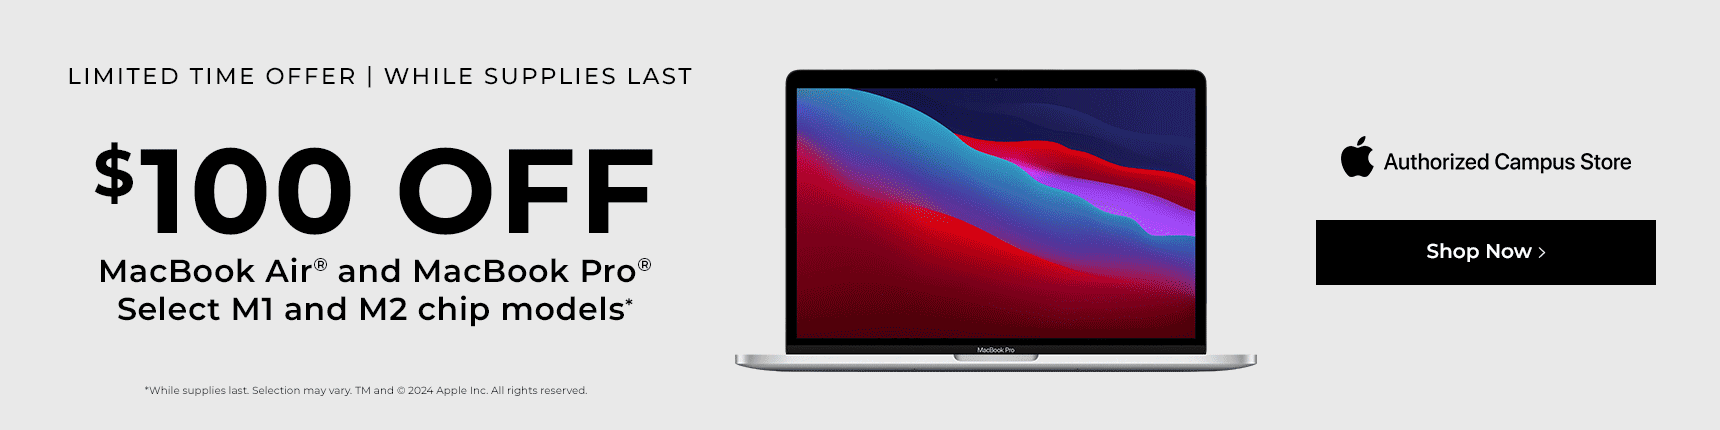 Limited time offer | While supplies last. $100 OFF MacBook Air and MacBook Pro. Select M1 and M2 chip models. 